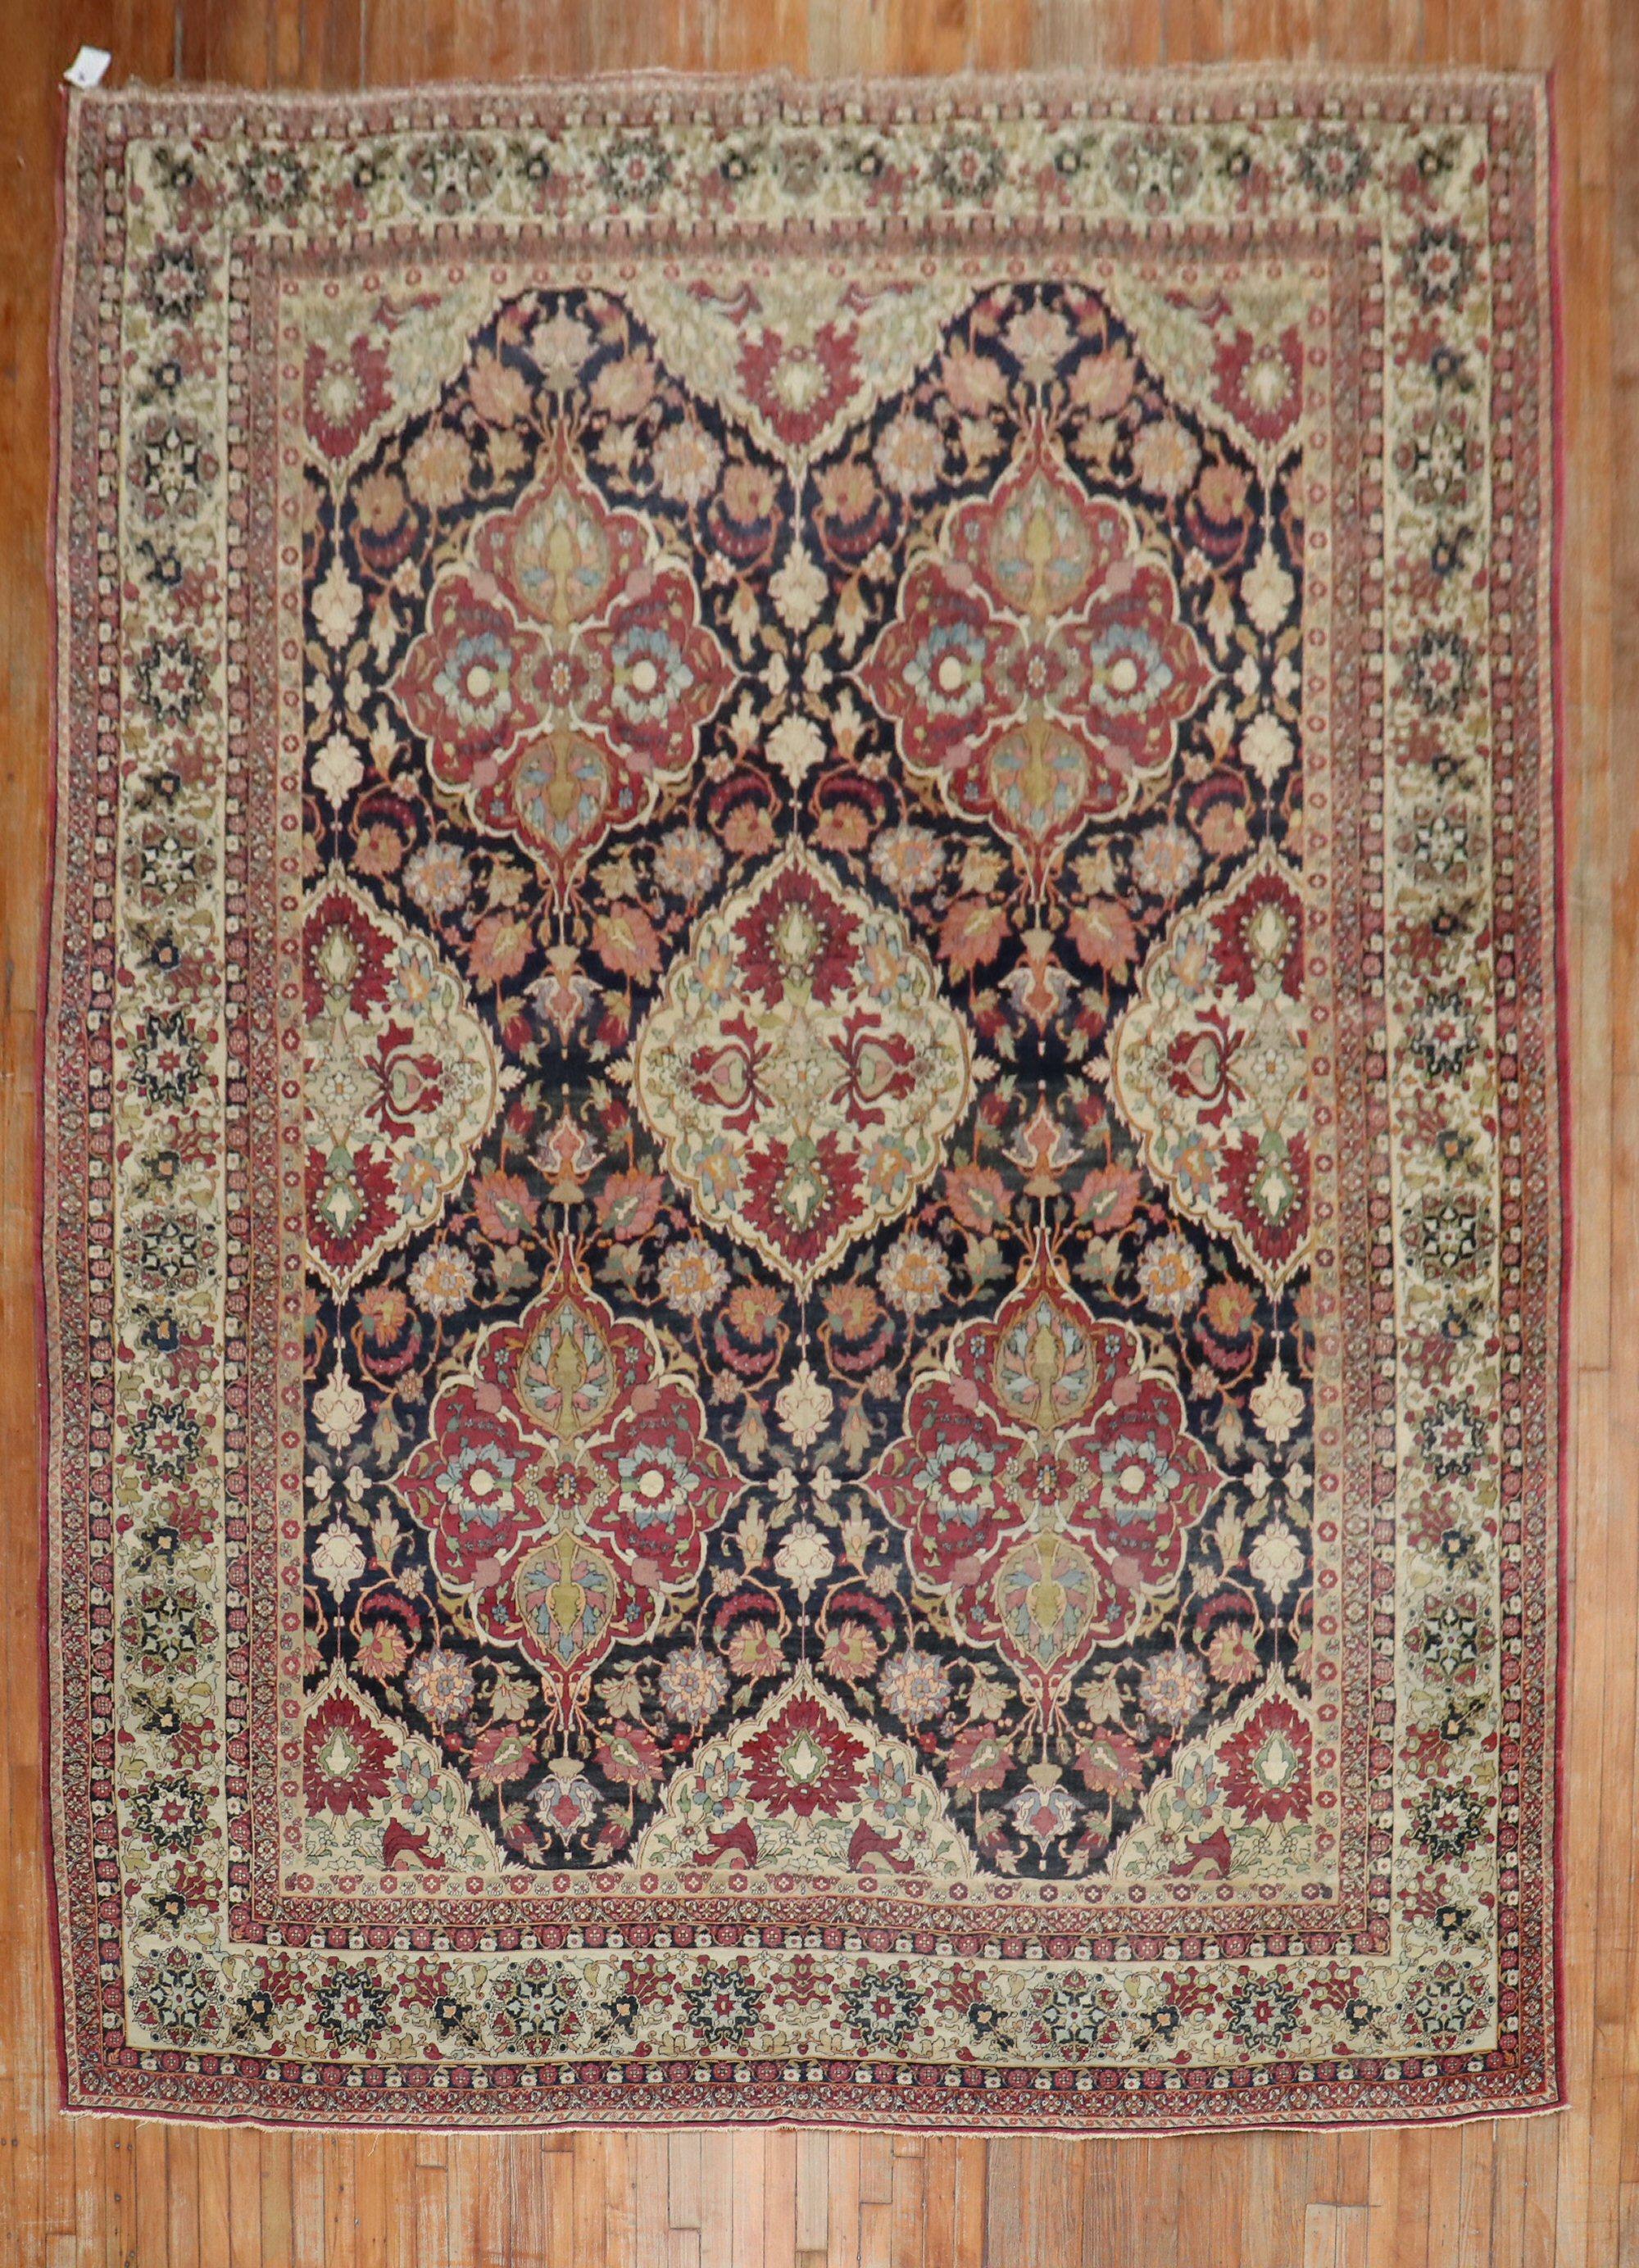 Phenomenal early 20th century antique Persian Kerman rug with a large scale all over design on a navy ground. Sparkling accents in plum, raspberry, beige, light blue and pink.

Measures: 9'1